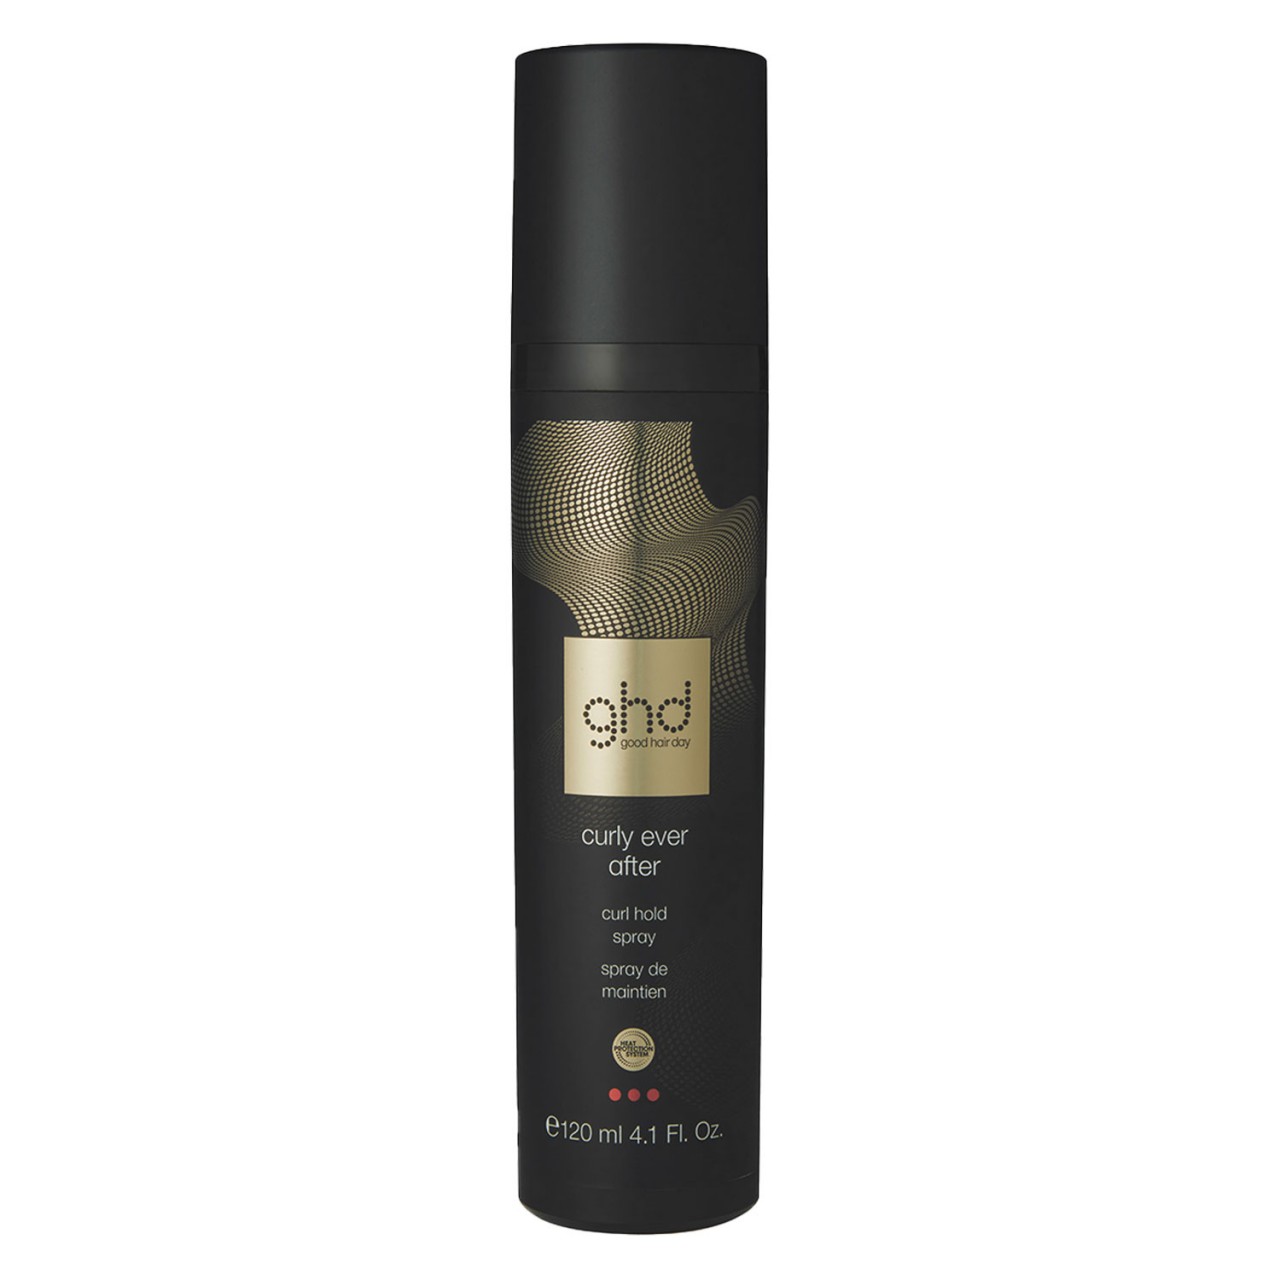 ghd Heat Protection Styling System - Curly Ever After Curl Hold Spray von ghd